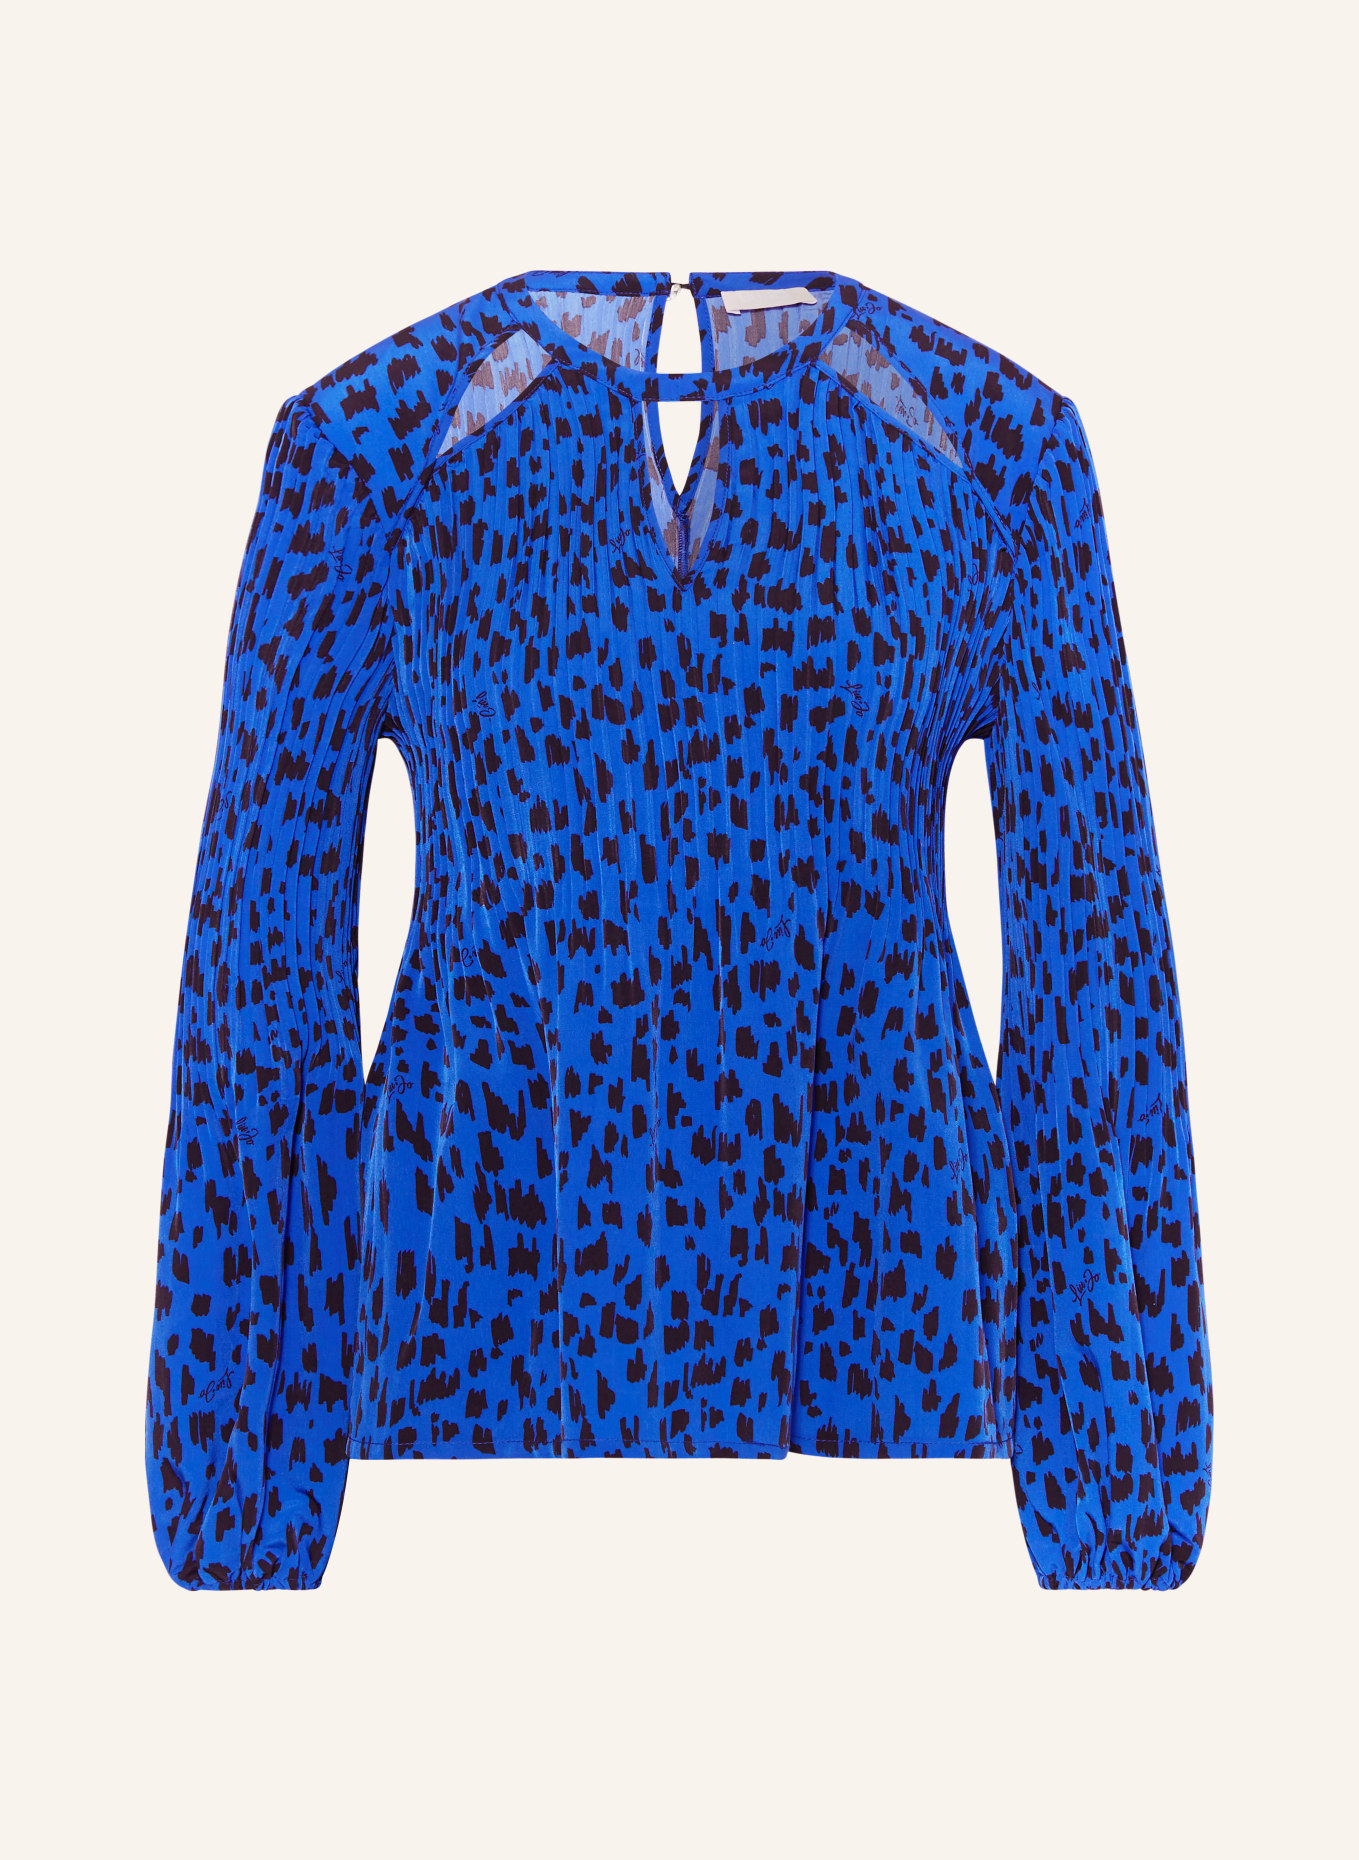 LIU JO Shirt blouse with cut-out and pleats, Color: BLUE/ BLACK (Image 1)